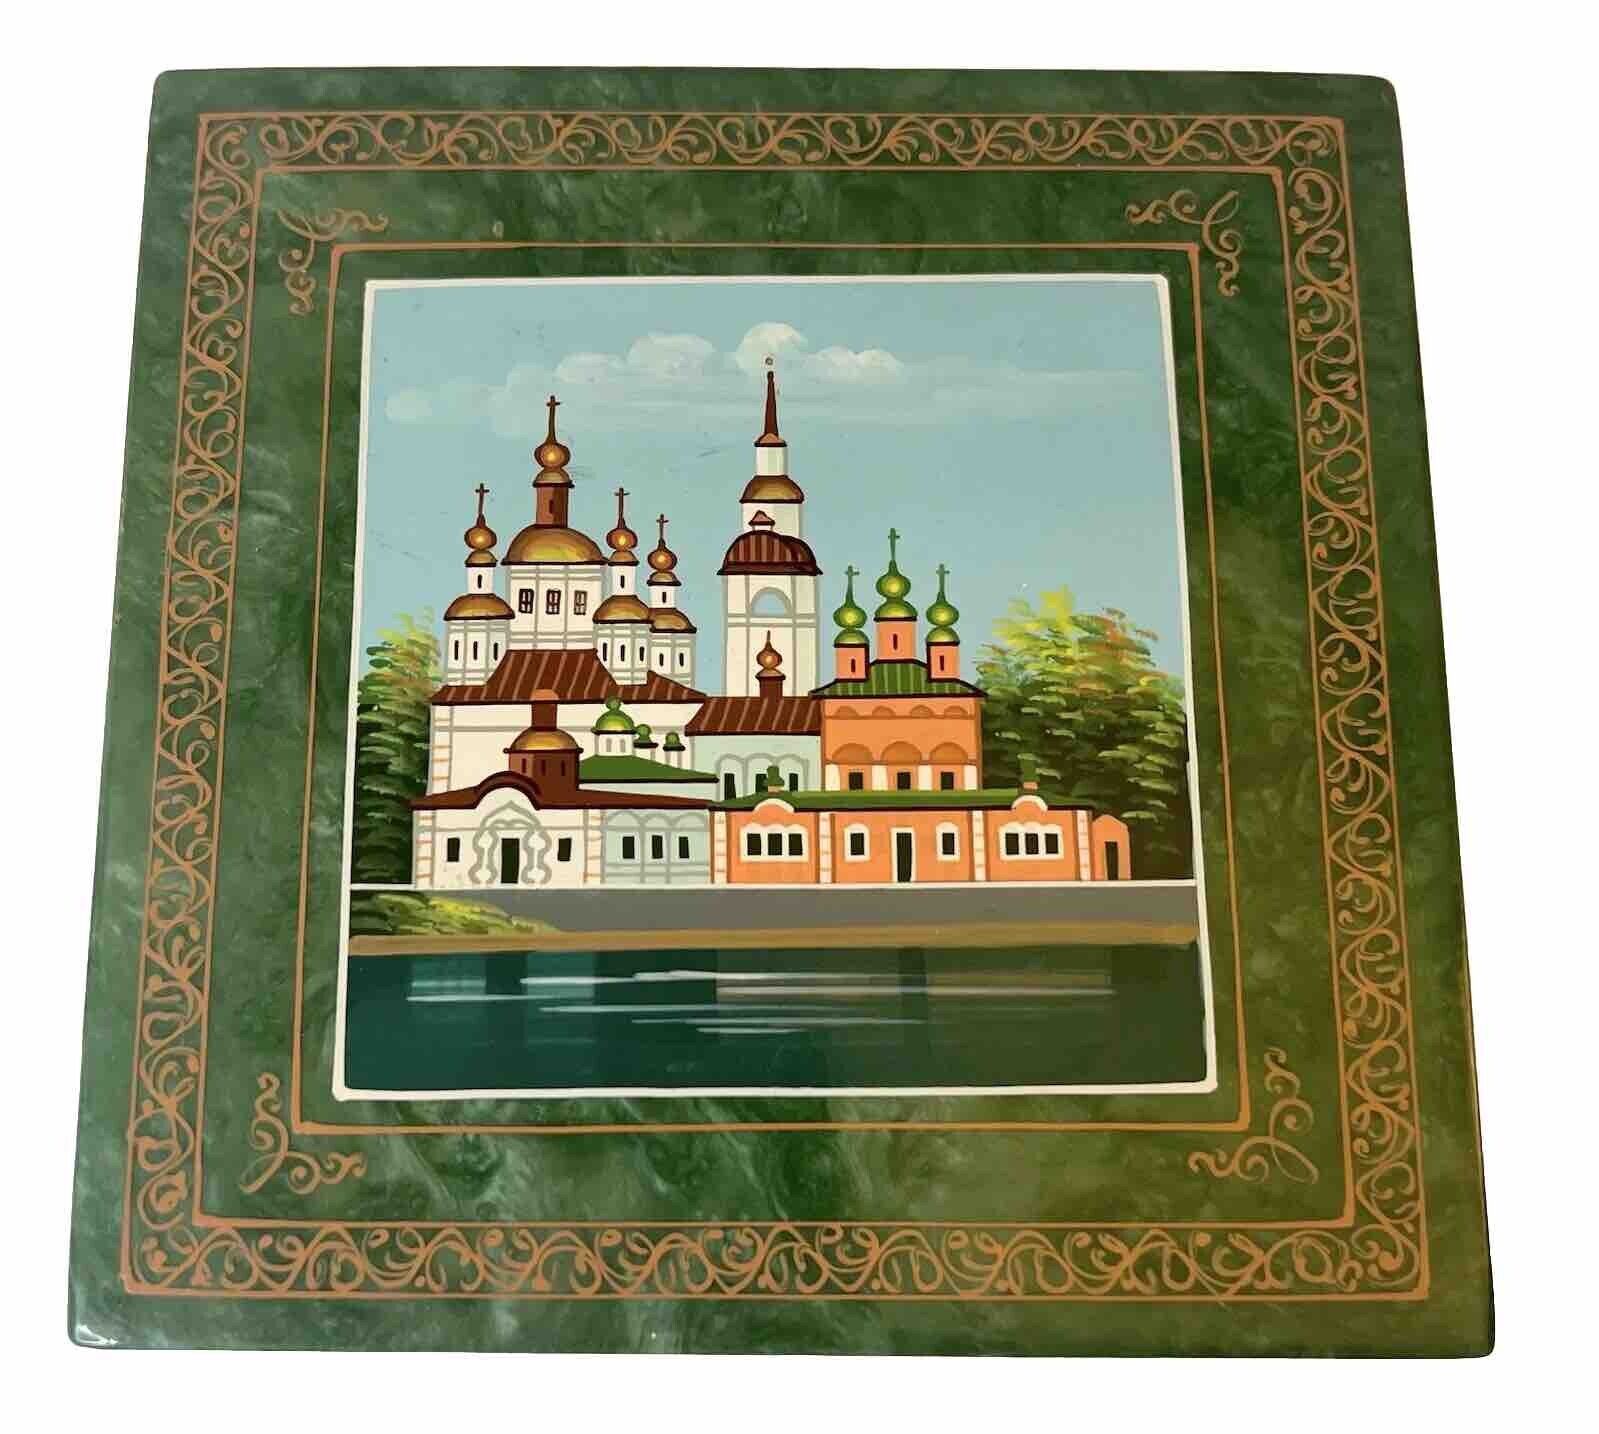 VTG Russian Lacquer Wooden Trinket Box Hand Painted Town Scene USSR Green